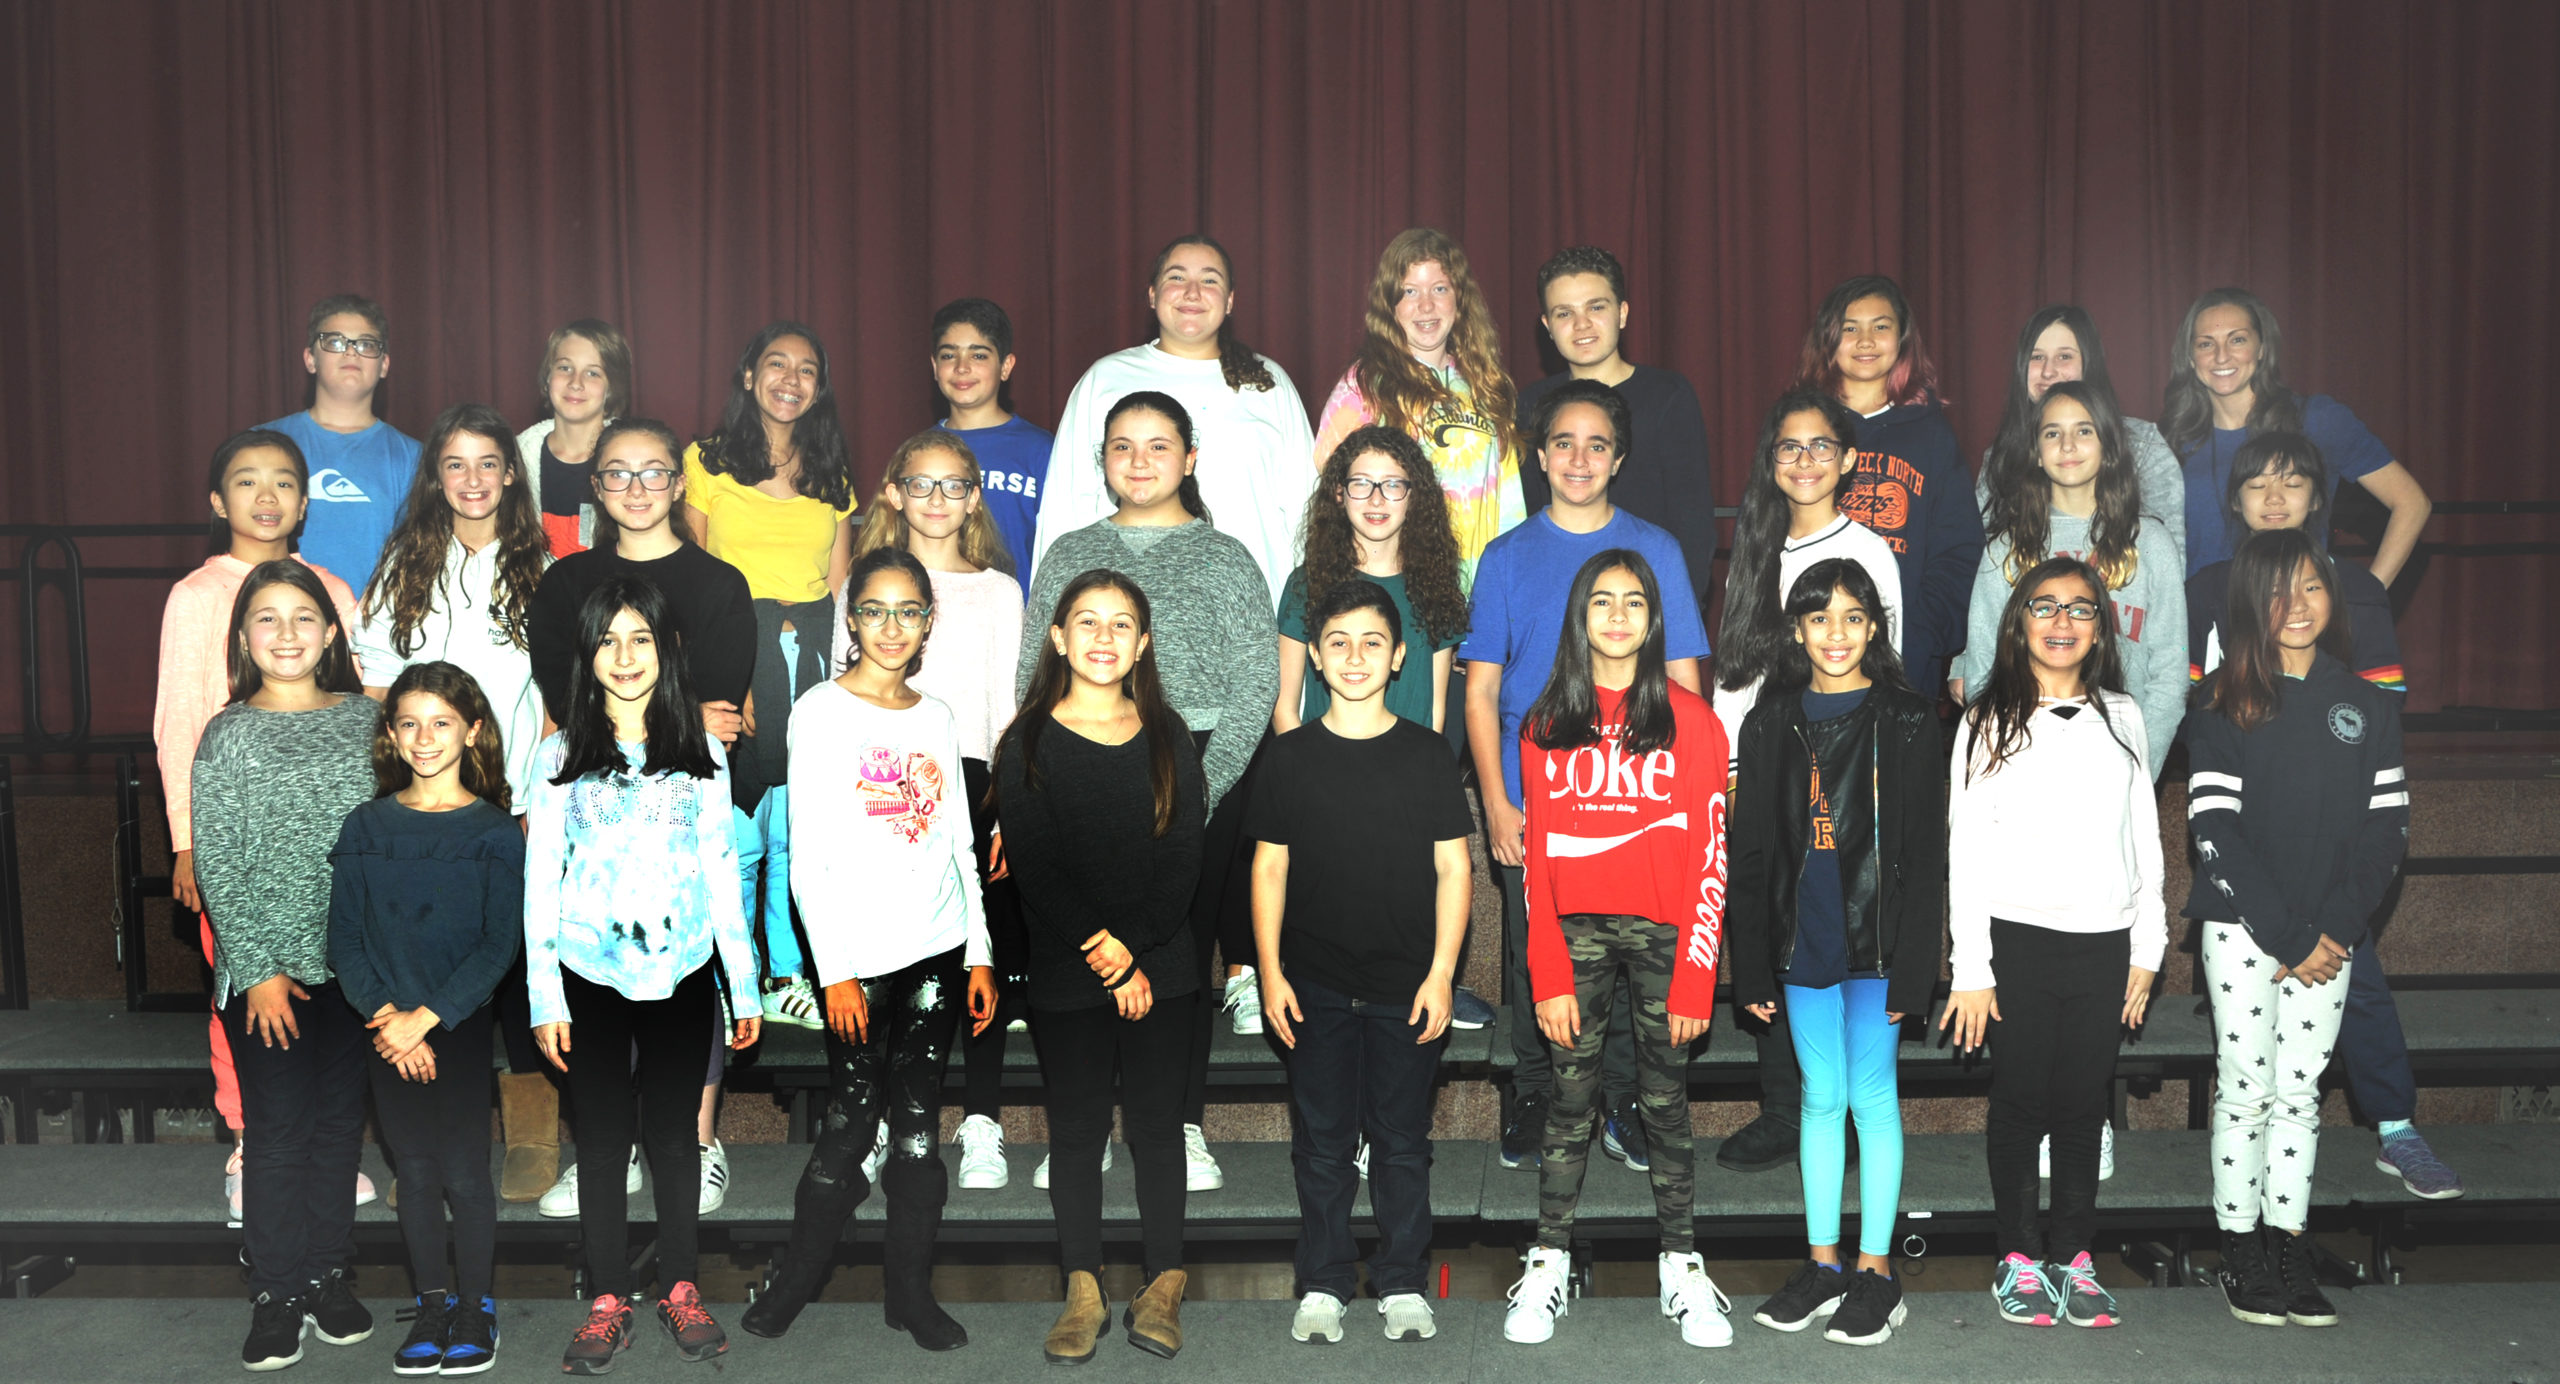 North Middle will present an evening of One Act plays on Nov. 20. (Photo by Bill Cancellare)